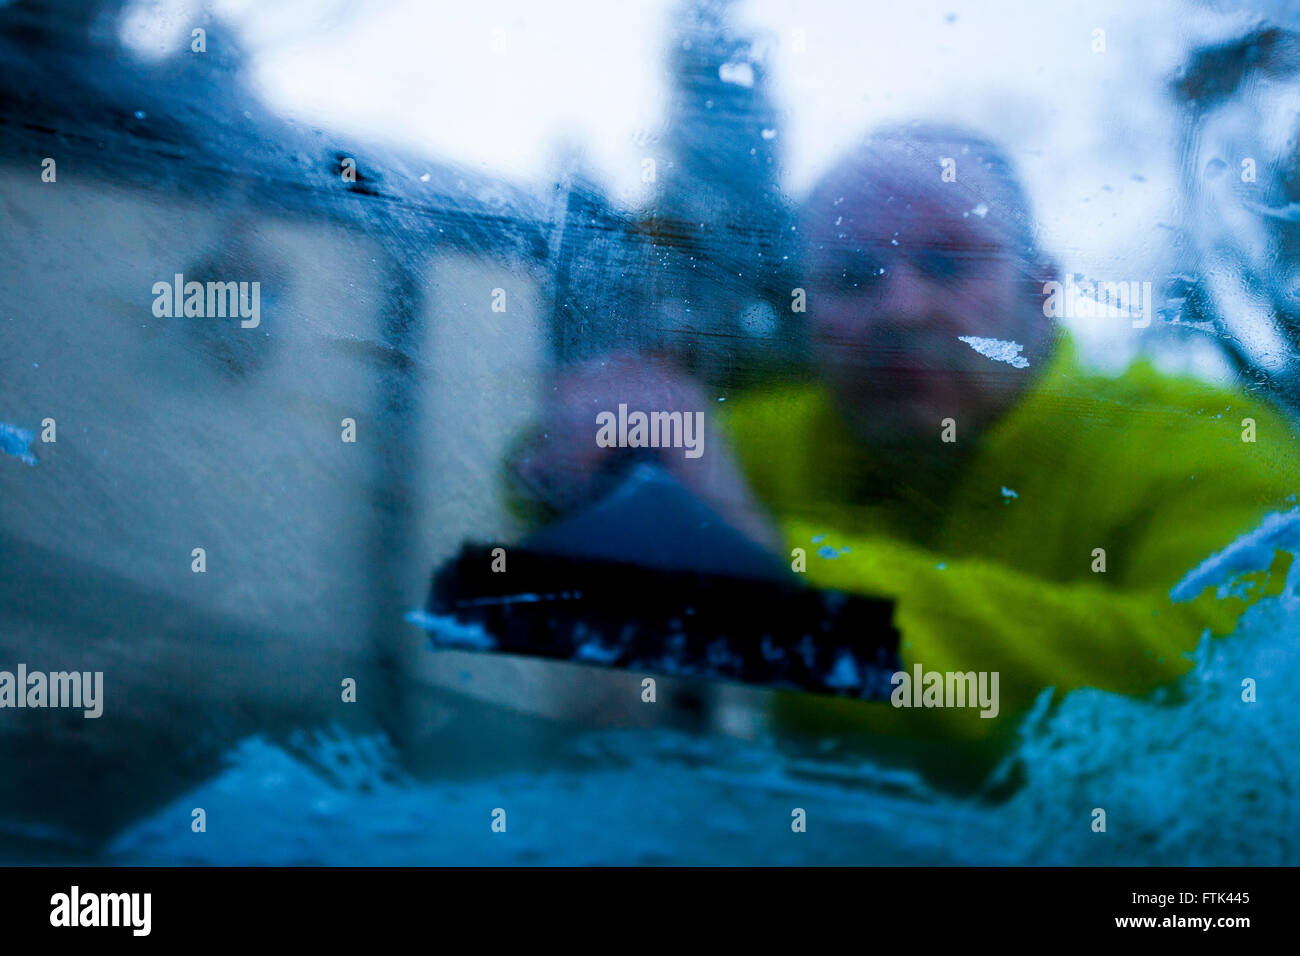 Person scraping ice off windscreen with camera placed inside car looking out towards person scraping, Flintshire, Wales, UK Stock Photo